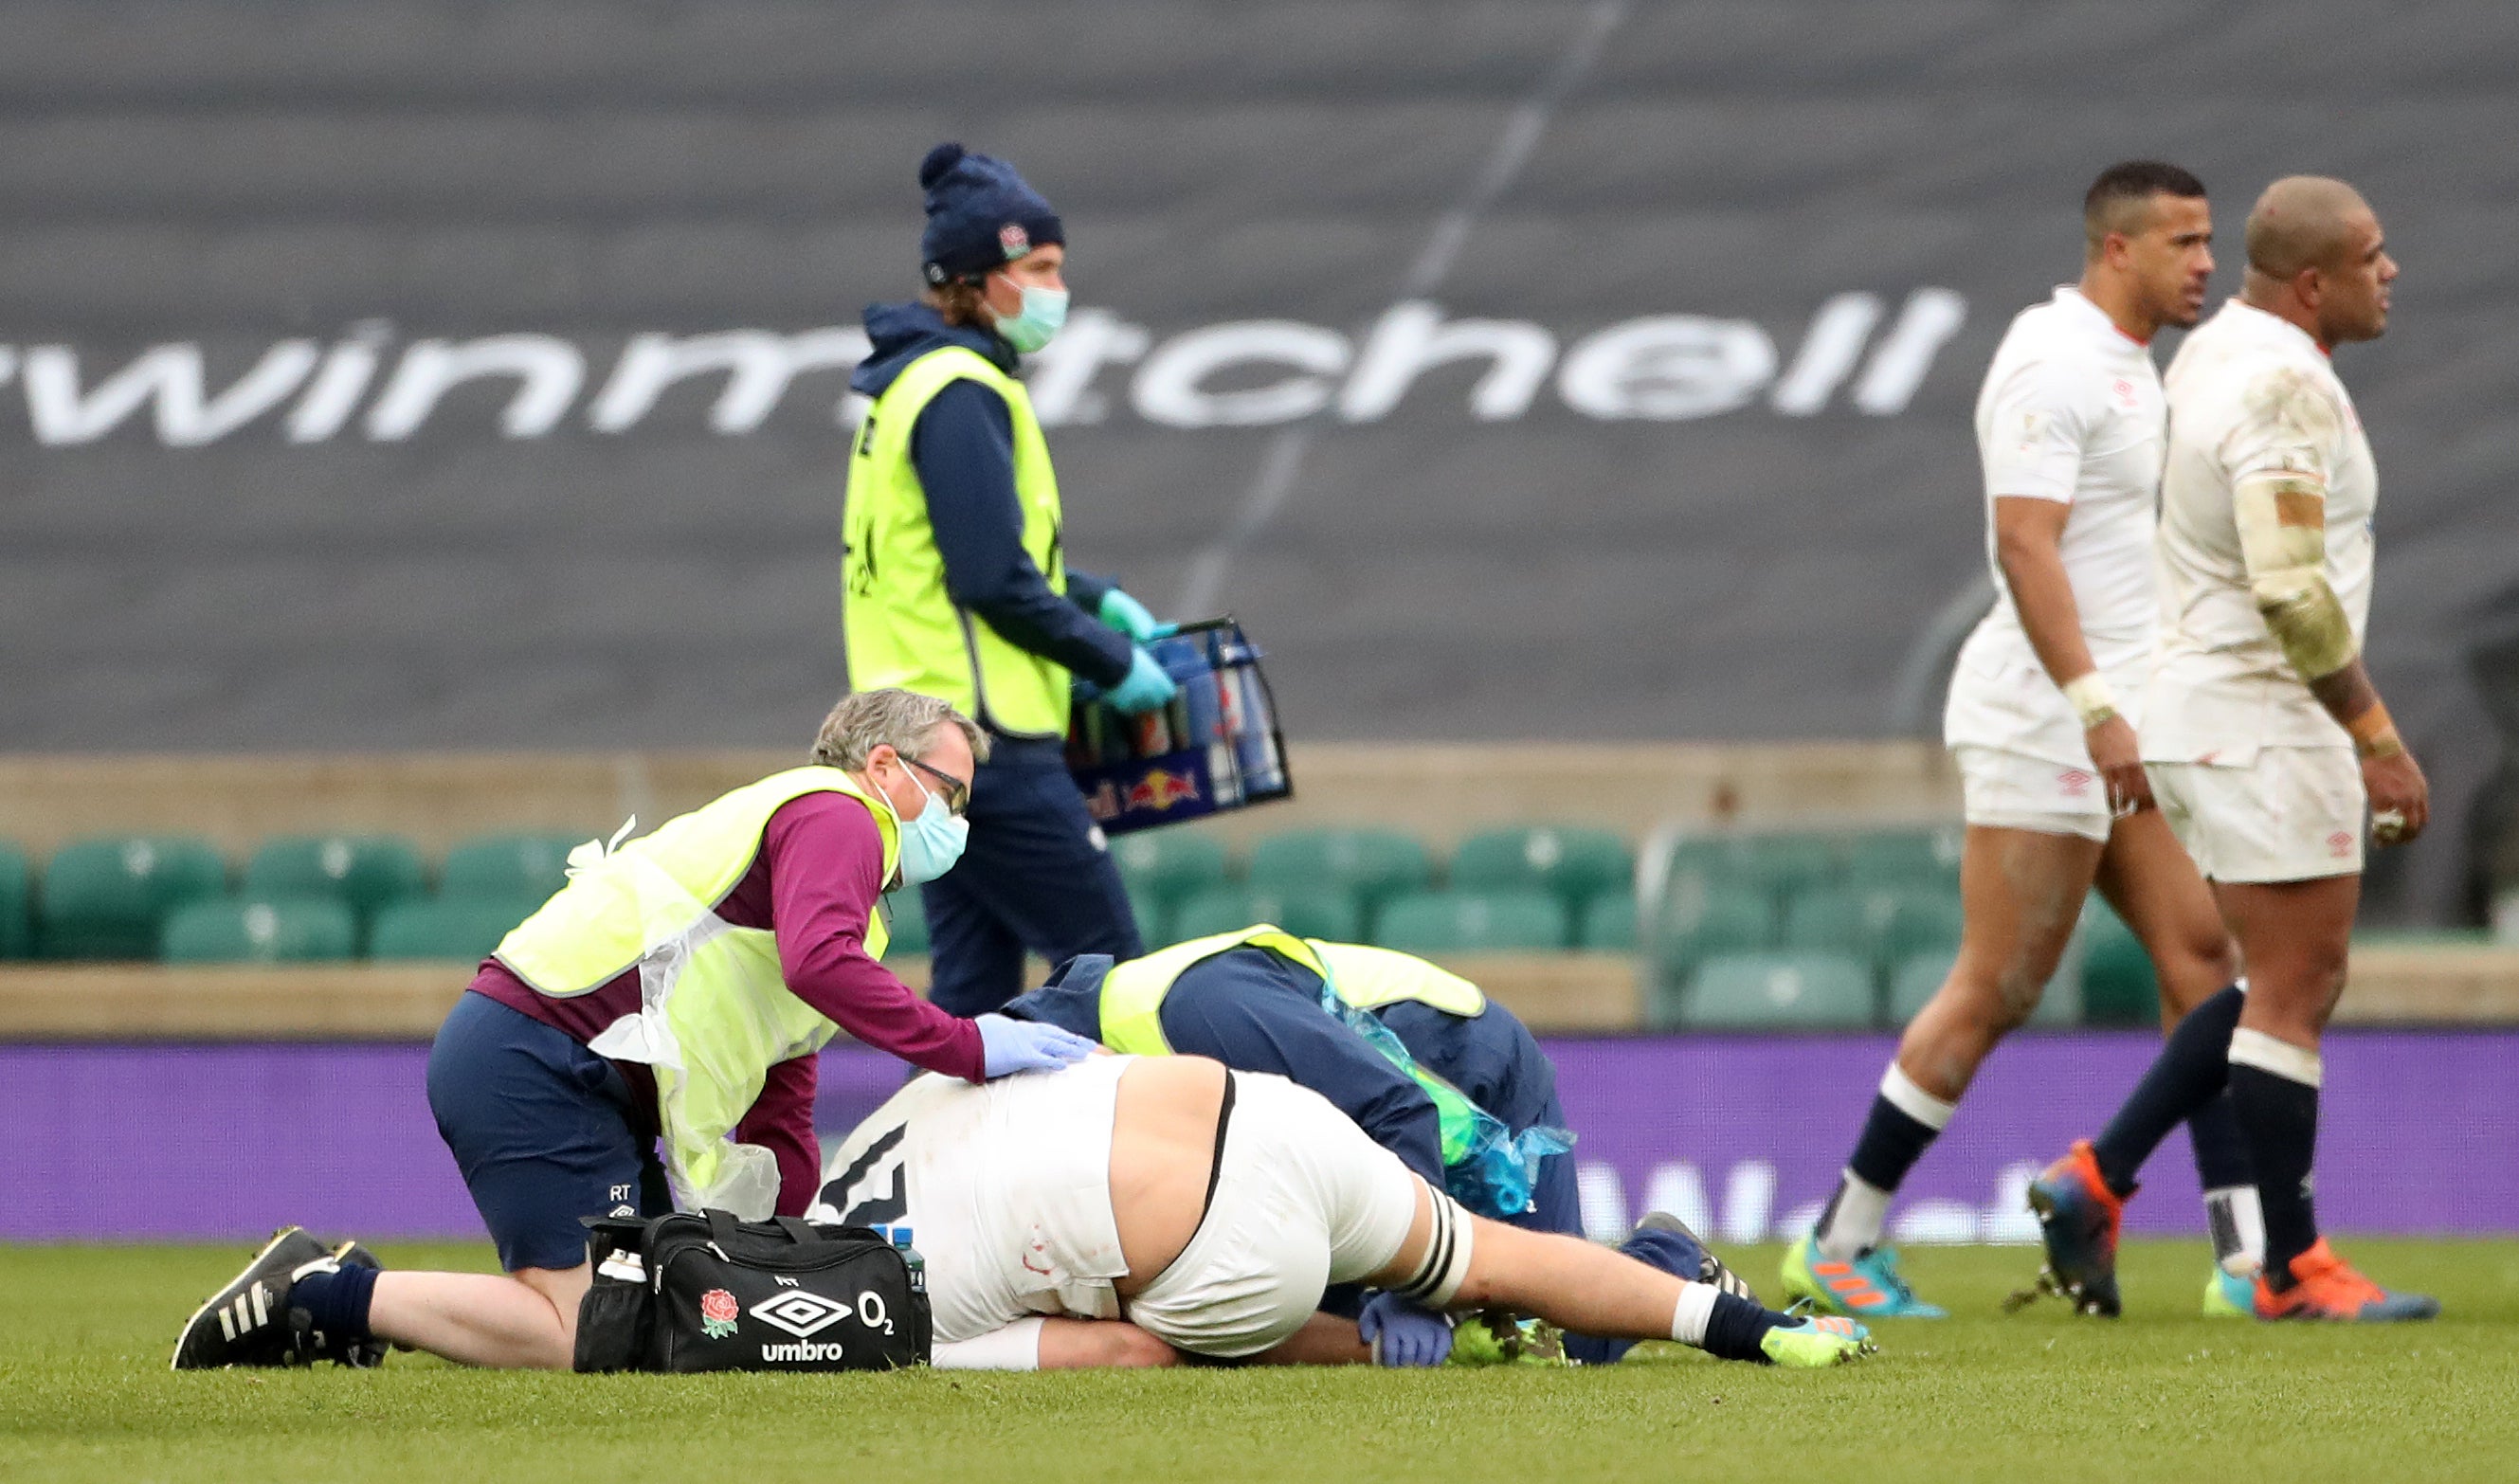 Jack Willis suffered a serious knee injury against Italy a year ago